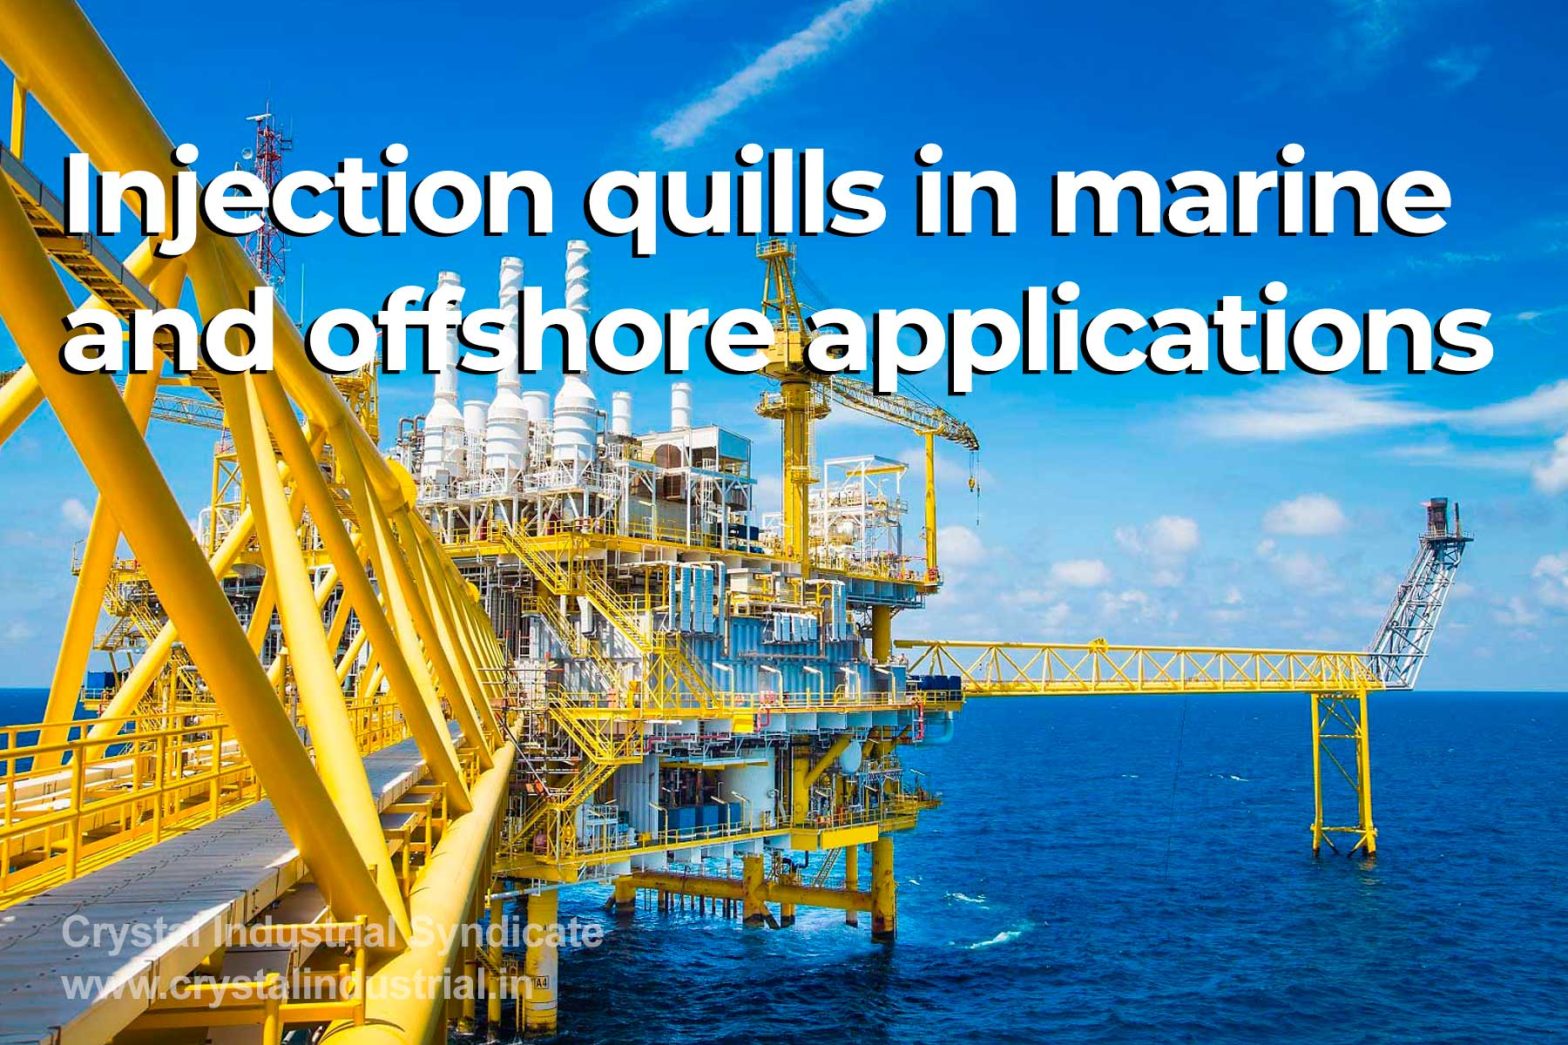 Challenges of using injection quills in marine and offshore applications